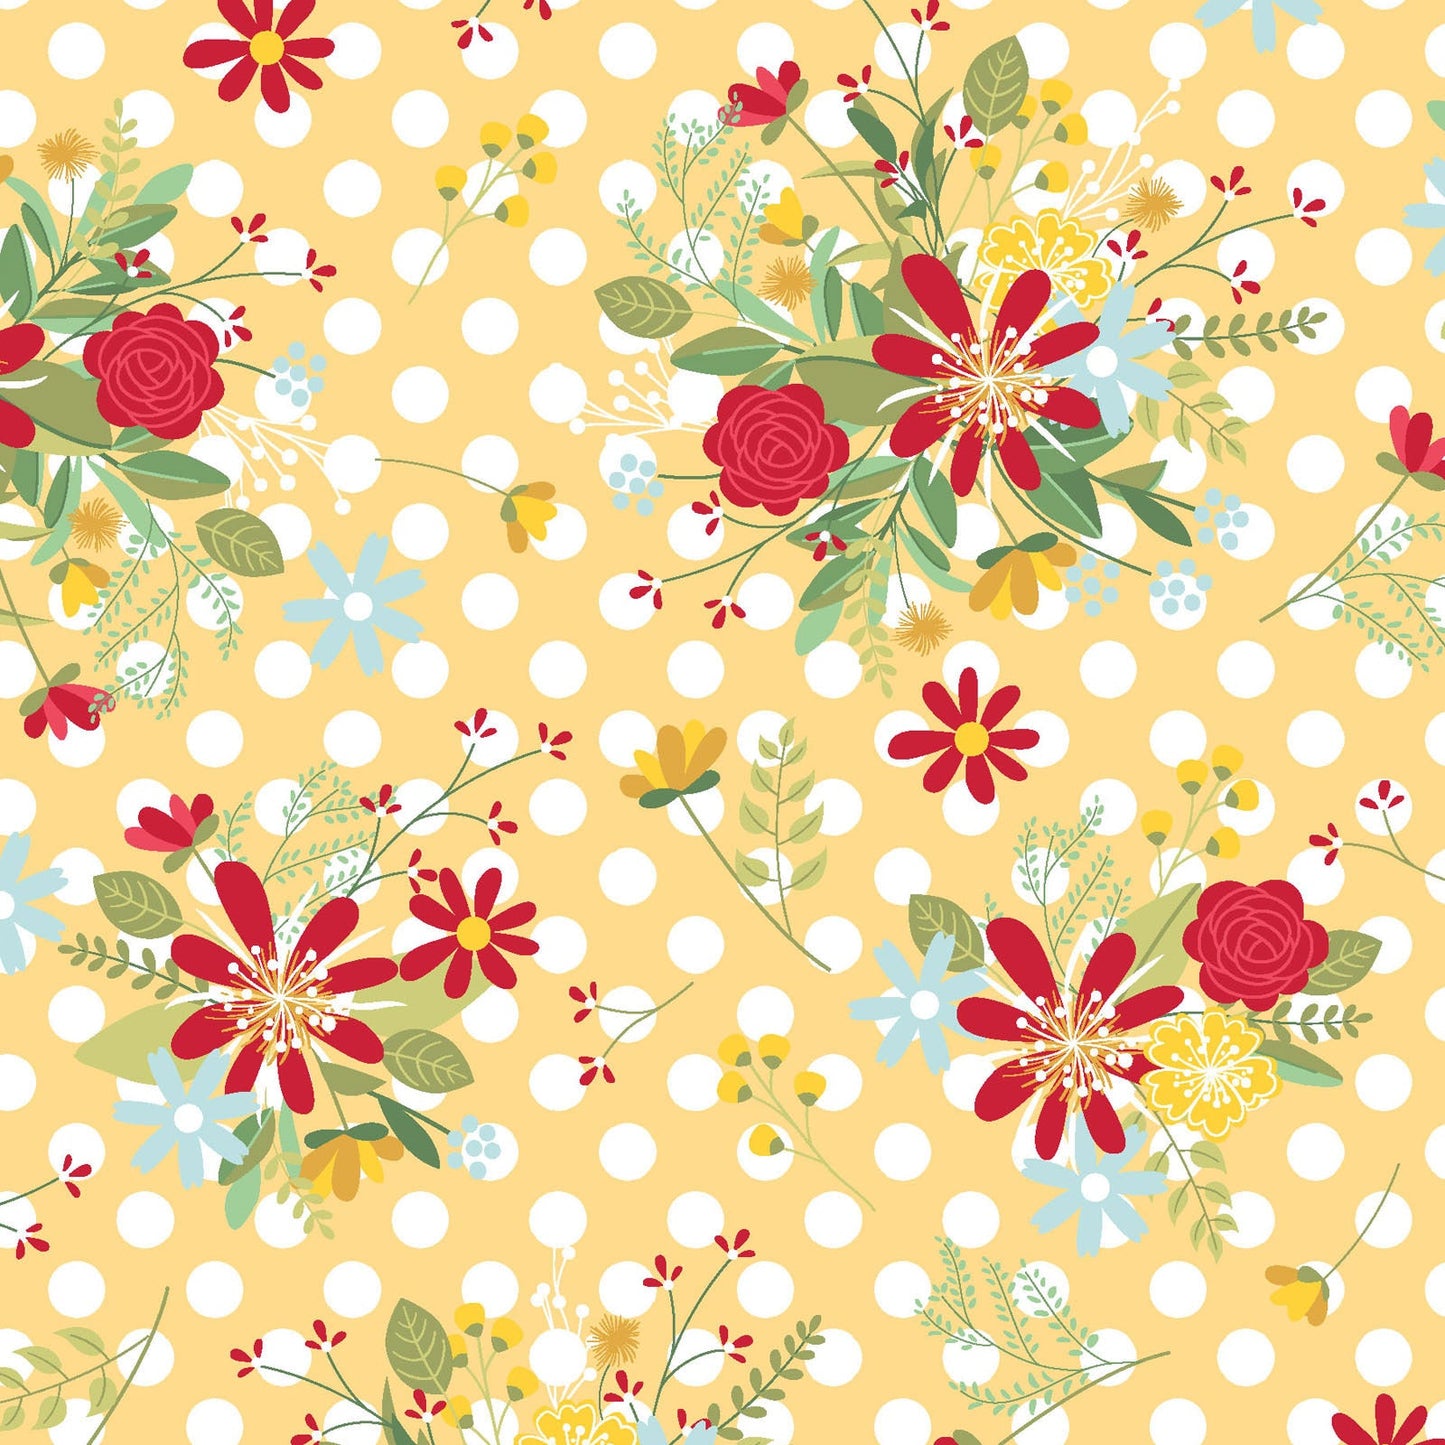 Polka Dot Flower on Yellow features colorful flowers on a background of yellow with large white dots. It has a multi-directional layout so it can be used as a non-directional fabric. The fabric is from the Red, White & Bloom collection by Kim Christopherson of Kimberbell for Maywood Studio and features everything to love about summer.